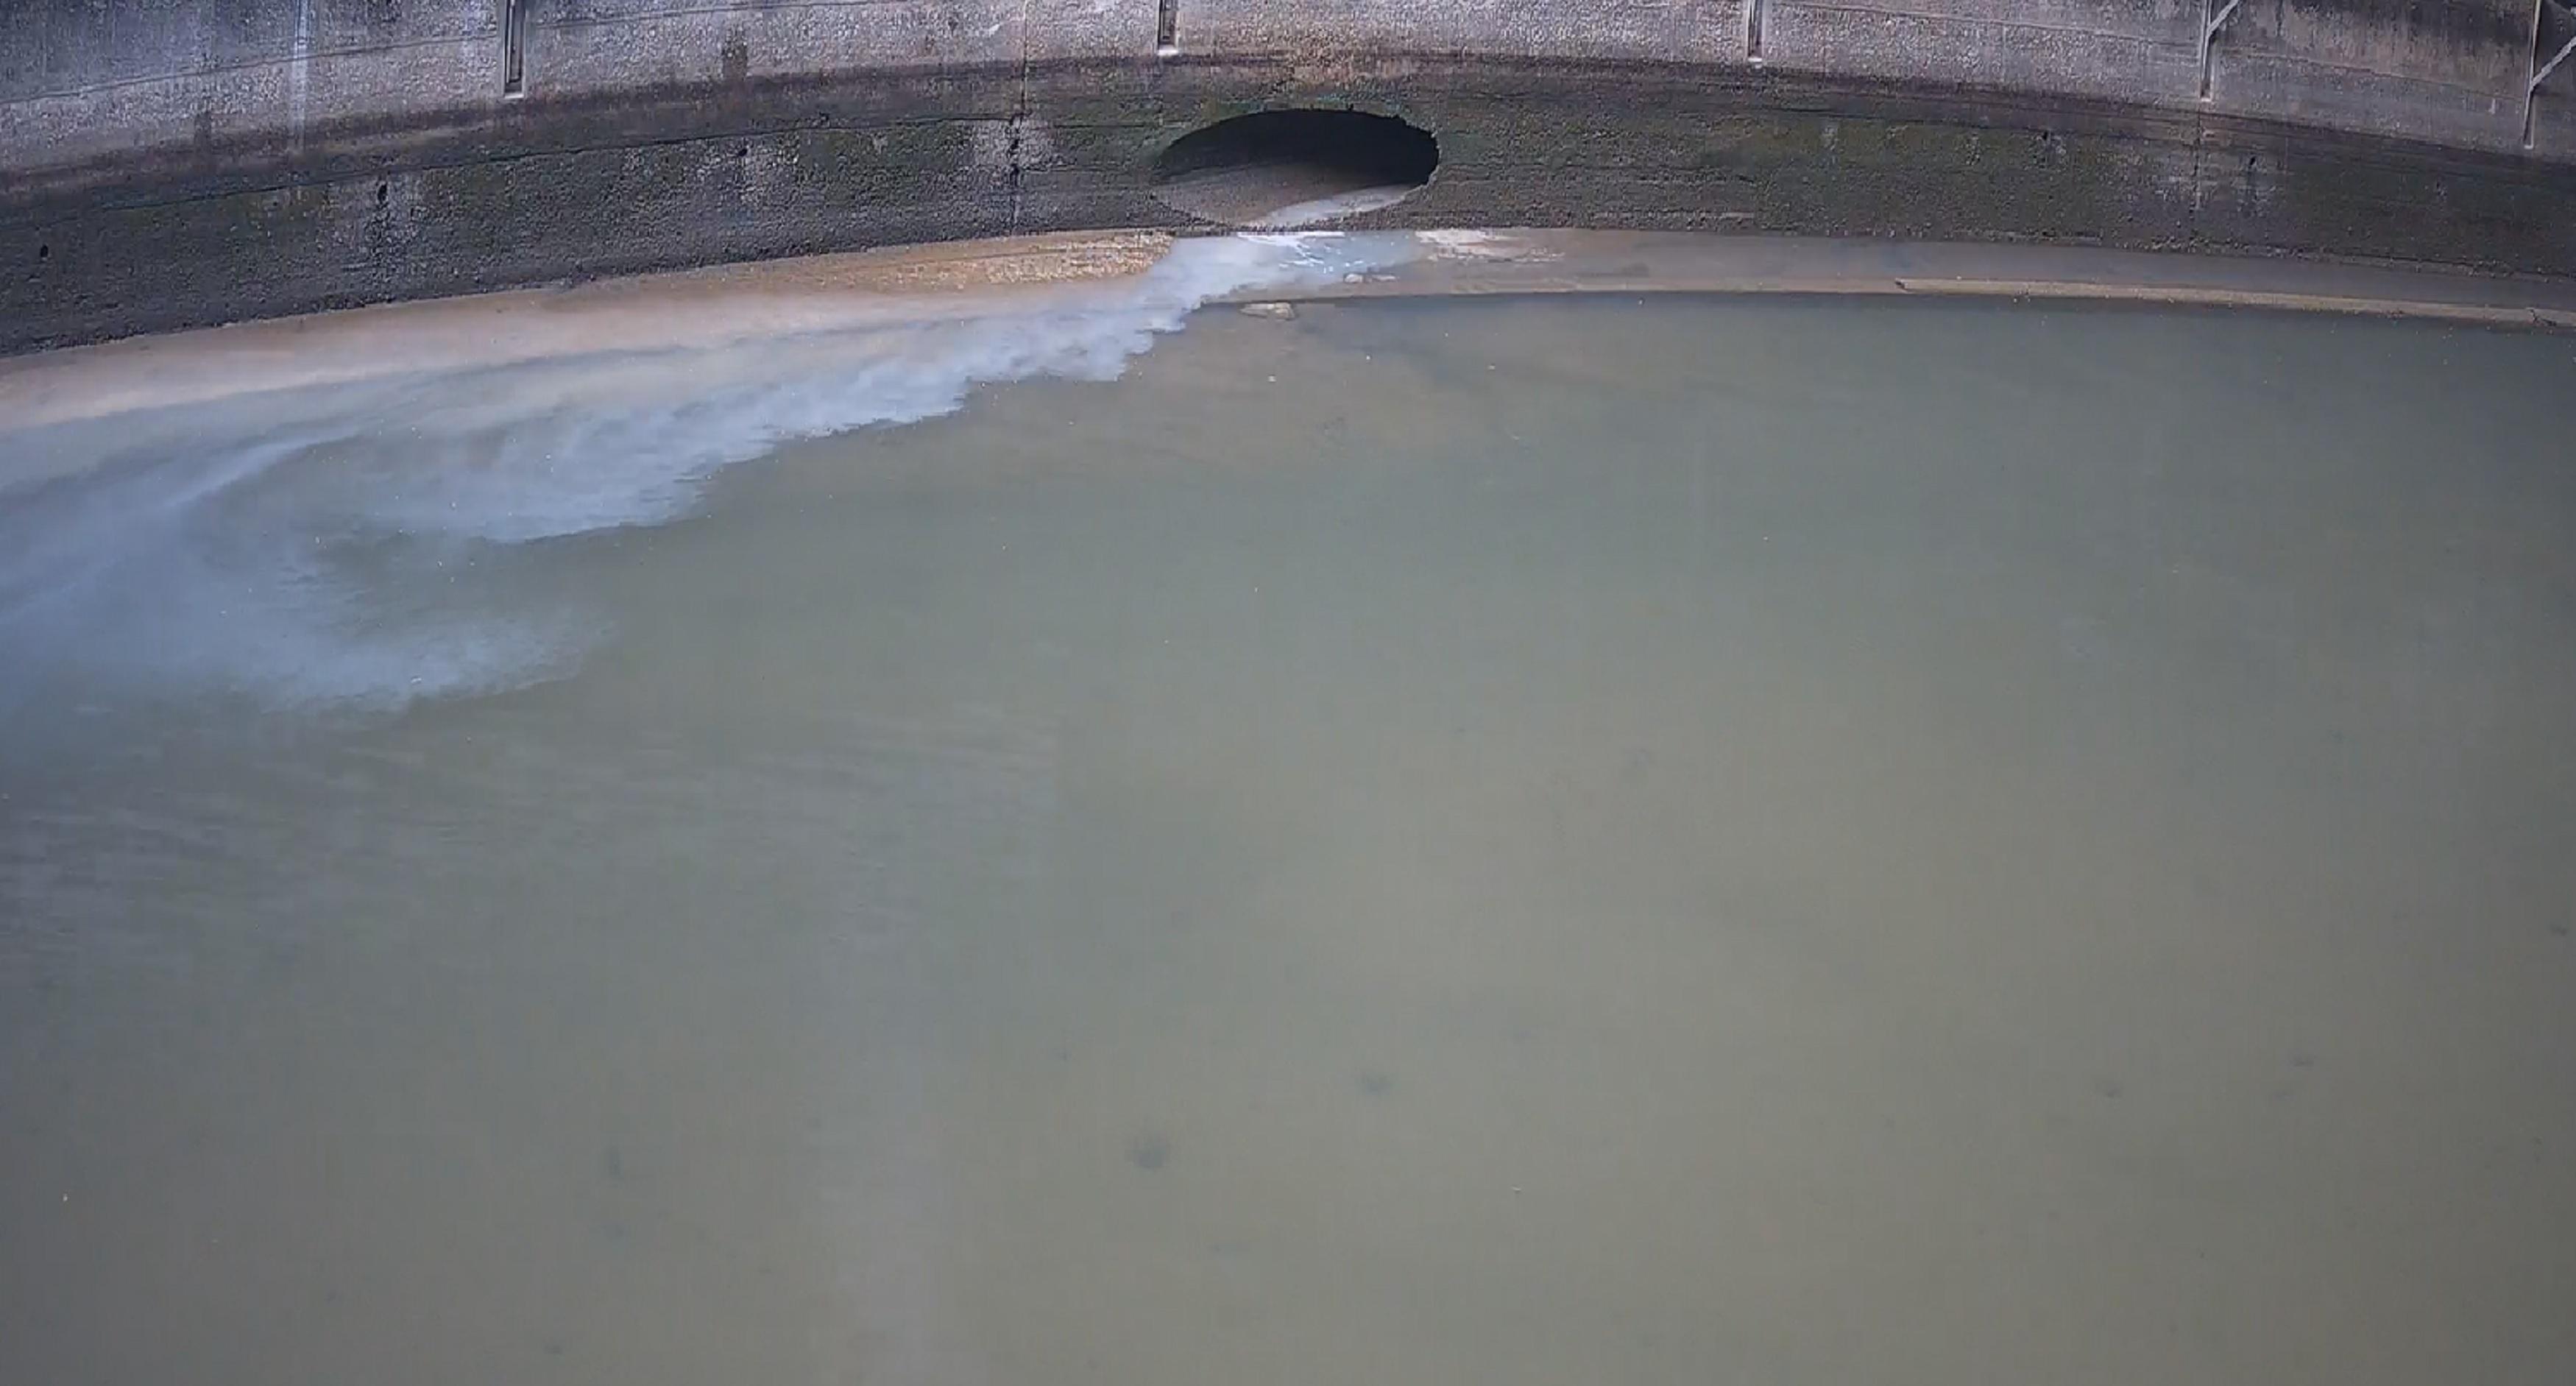 The Environmental Protection Department conducts real-time surveillance of the public drainage system with its smart surveillance system. Photo shows a video image captured by the system, showing a suspected case of illegal discharge of polluted water into the public drainage system. The smart system will notify enforcement officers immediately once an unusual discharge is found.